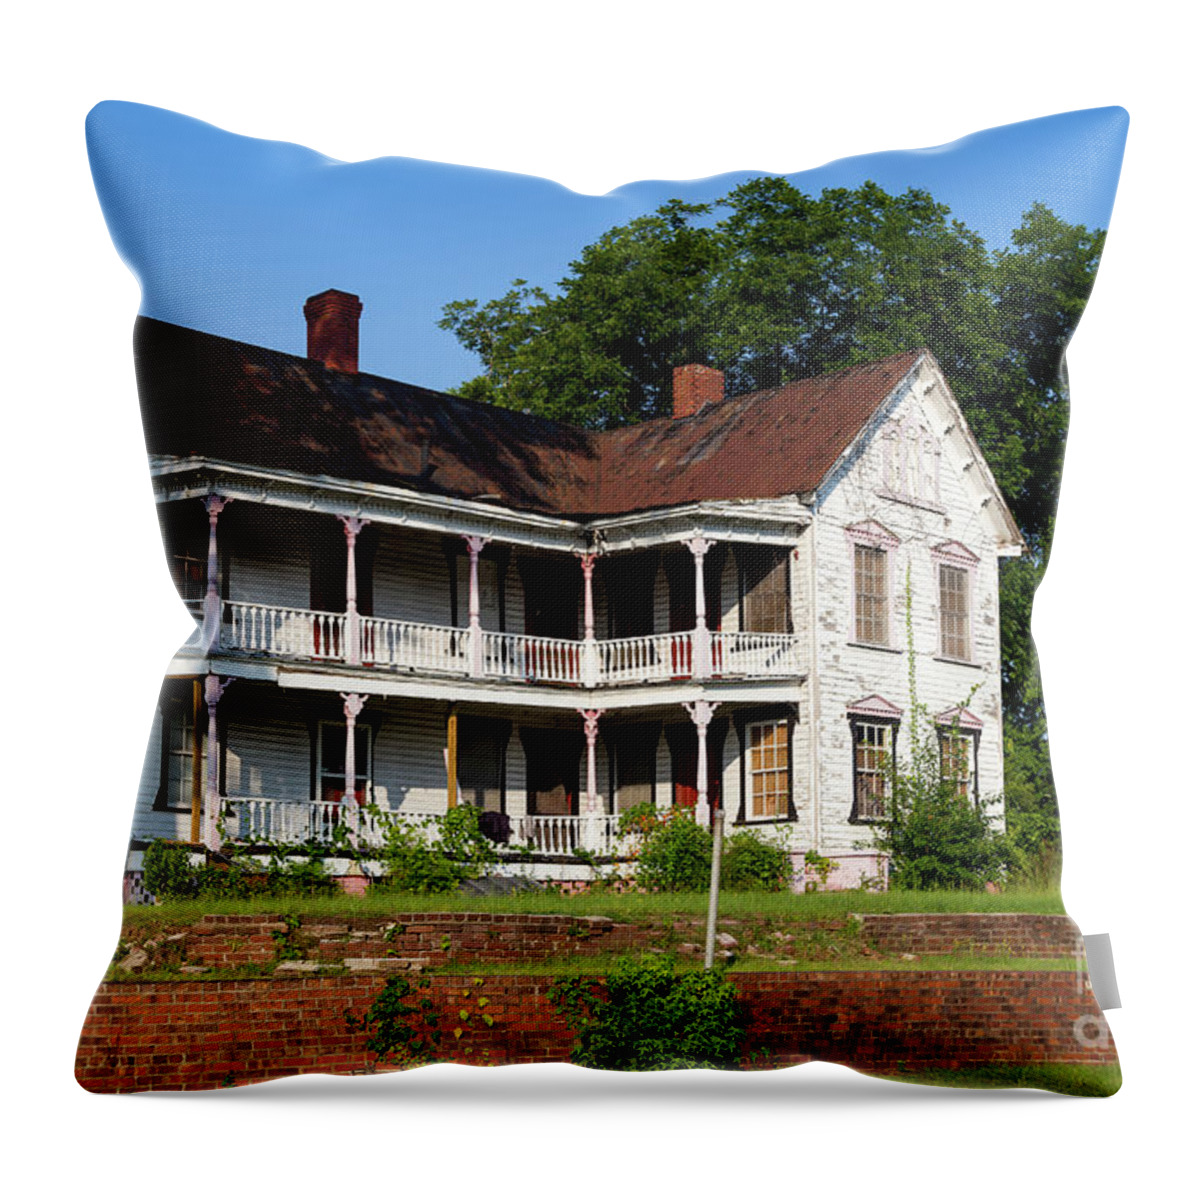 Shull House Throw Pillow featuring the photograph Old Shull Mansion by Charles Hite